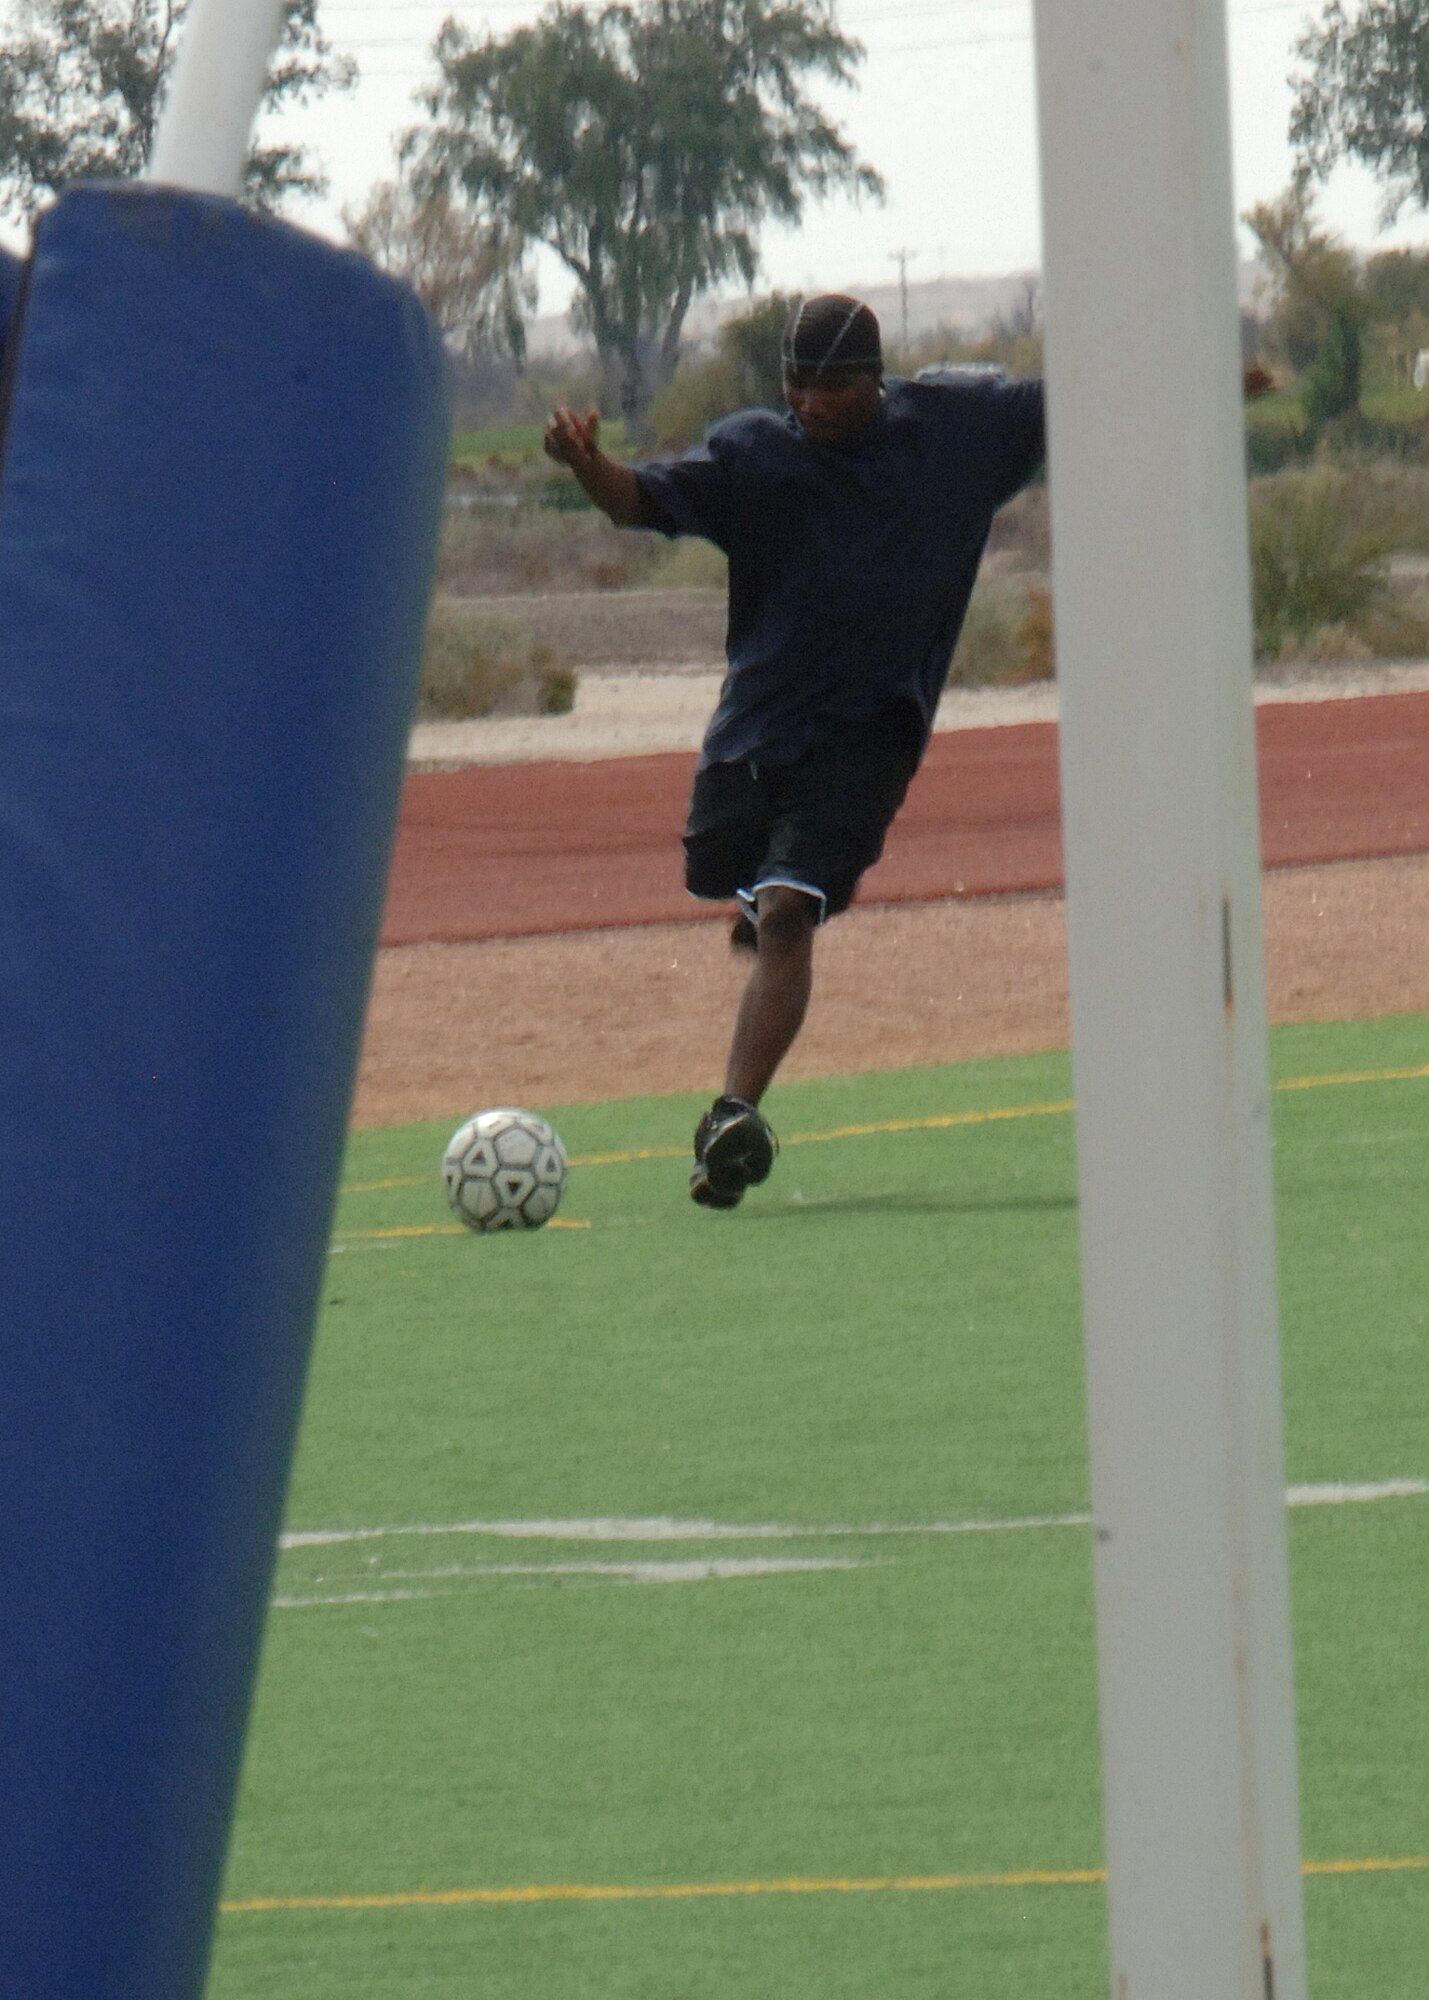 Airmen from 49th Materiel Maintenance Group compete in the soccer kick competition during Sports Day at Holloman Air Force Base, N.M., October 10. Airmen from all squadrons come out to participate in many of Hollomans 15 different events. (U.S. Air Force photo/Airman 1st Class Michael Means)